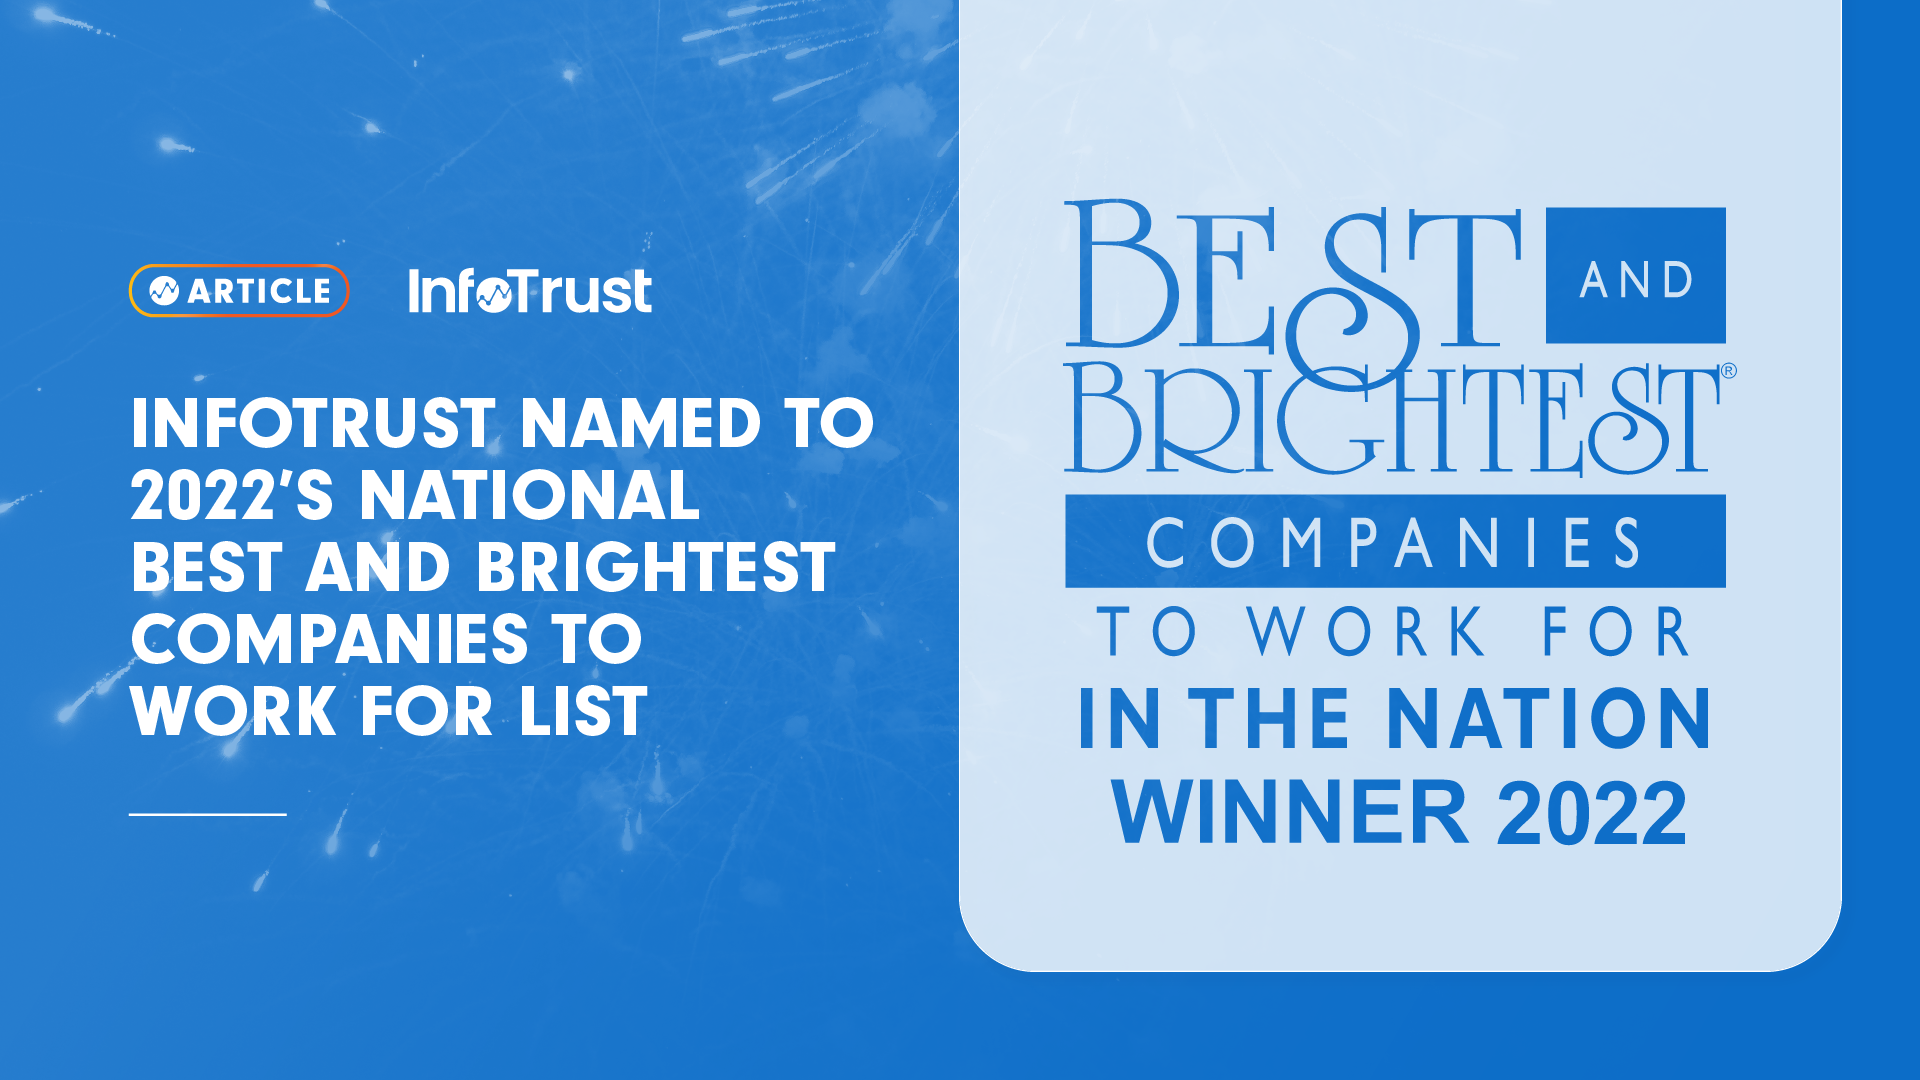 InfoTrust Named to 2022's National Best and Brightest Companies to Work